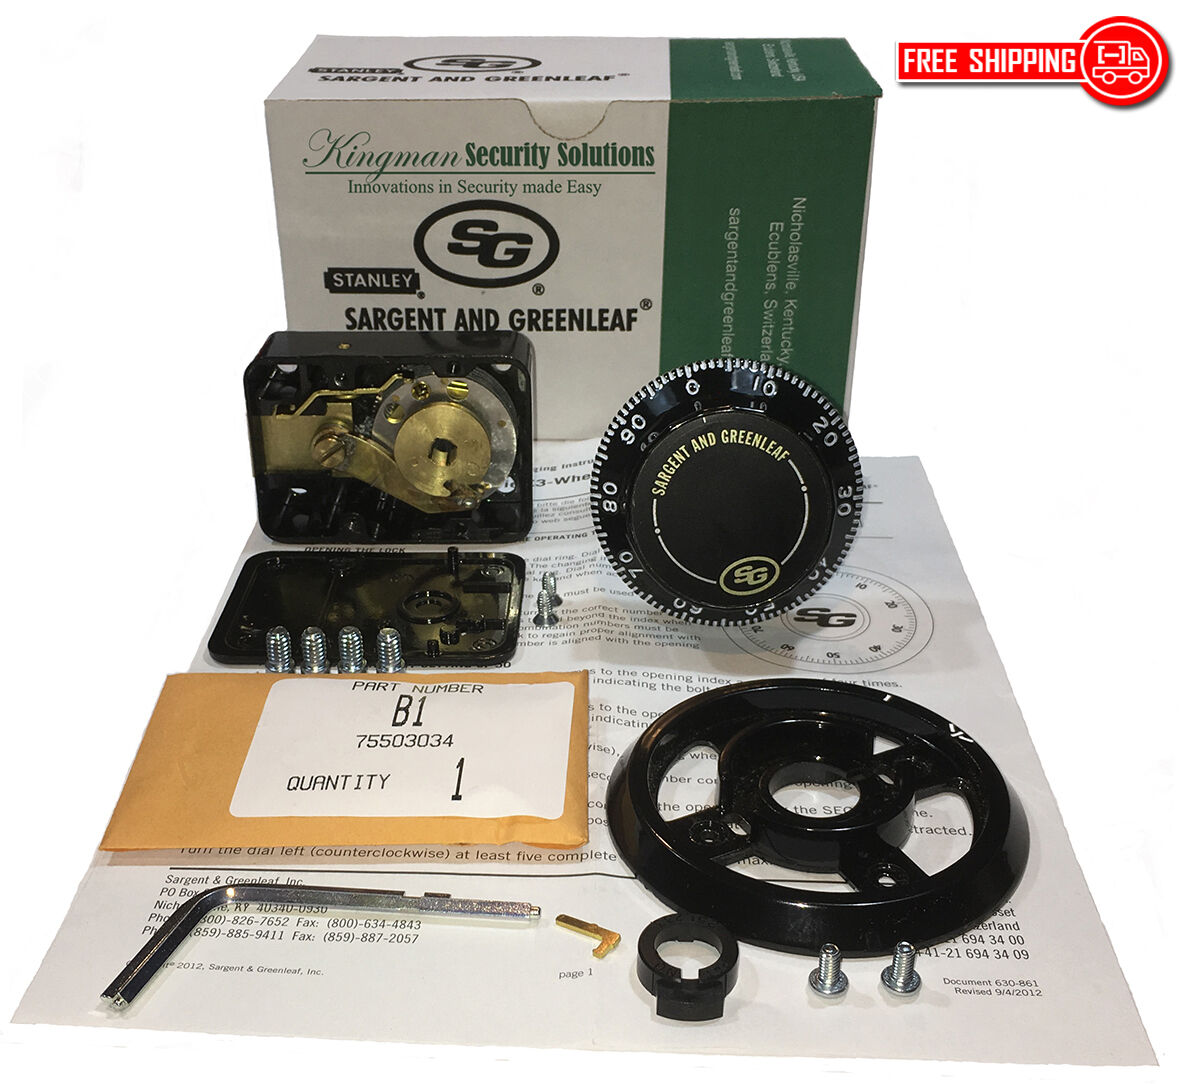 S&g - Sargent And Greenleaf 6730-100 Mechanical Combination Dial & Lock Kit -nib